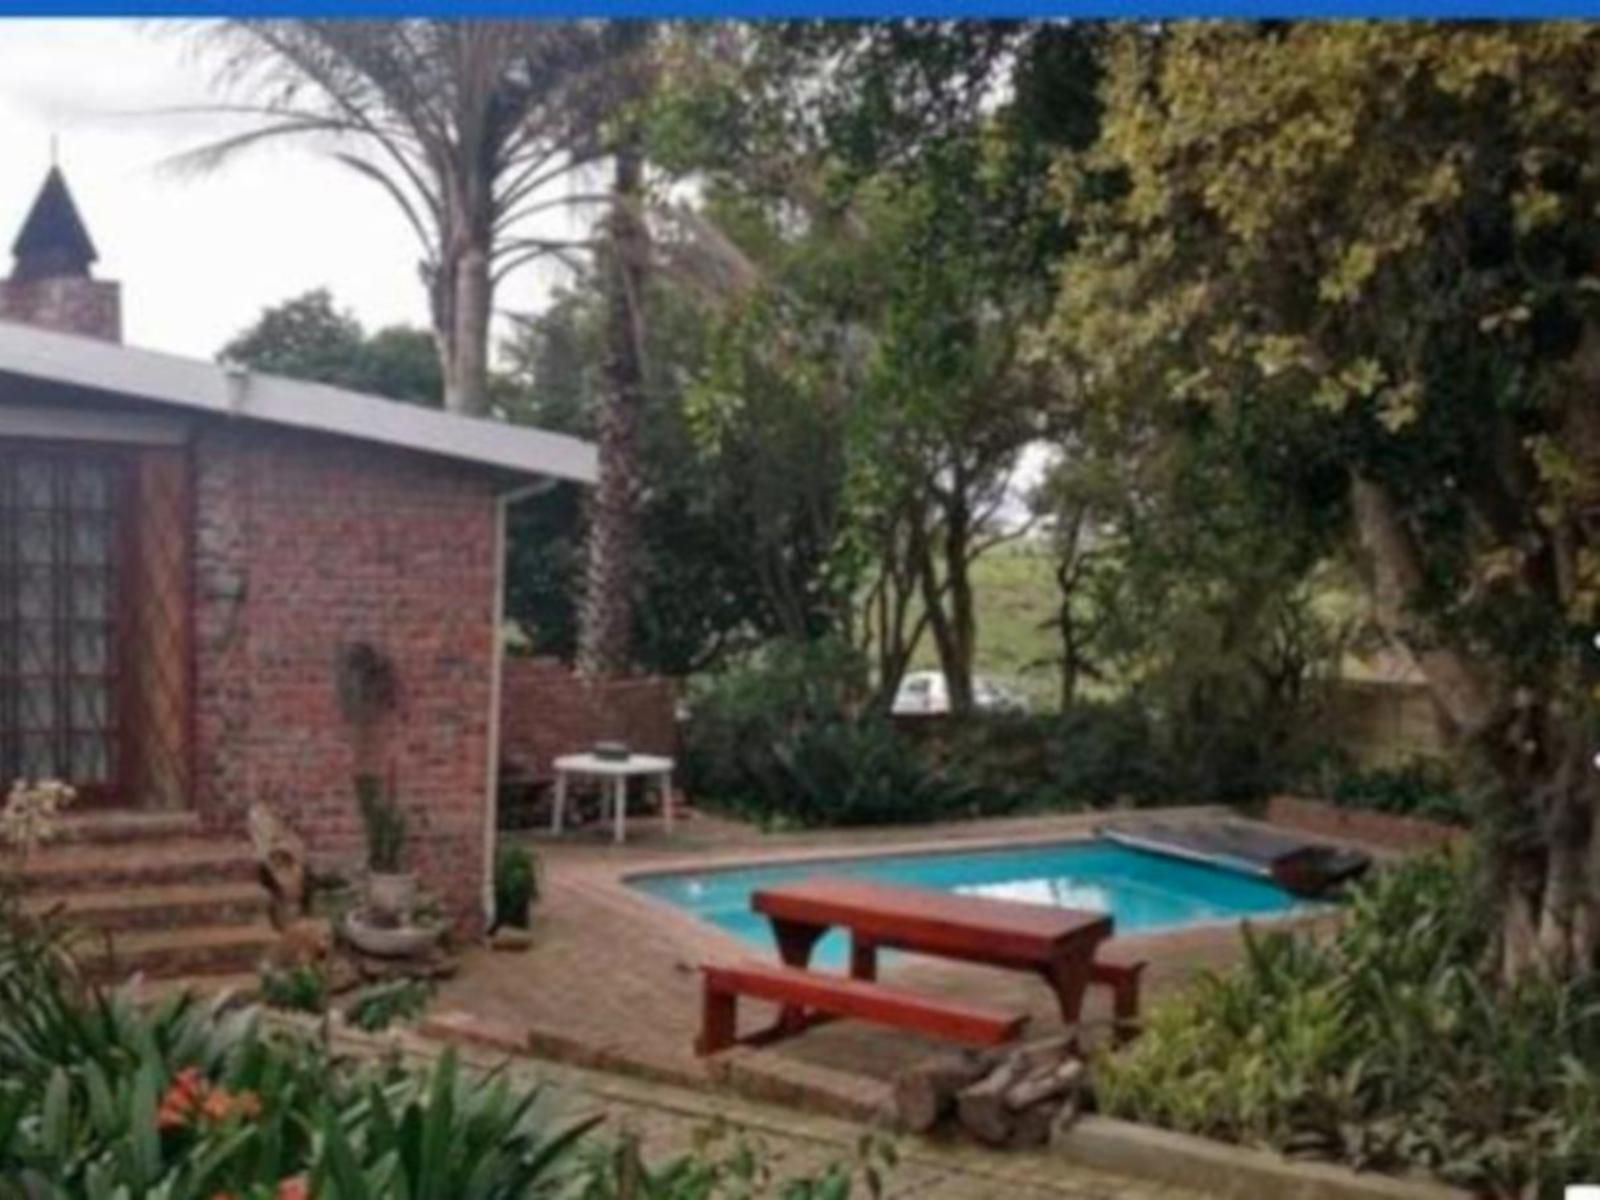 40B Overnight Accommodation Humansdorp Eastern Cape South Africa House, Building, Architecture, Garden, Nature, Plant, Swimming Pool